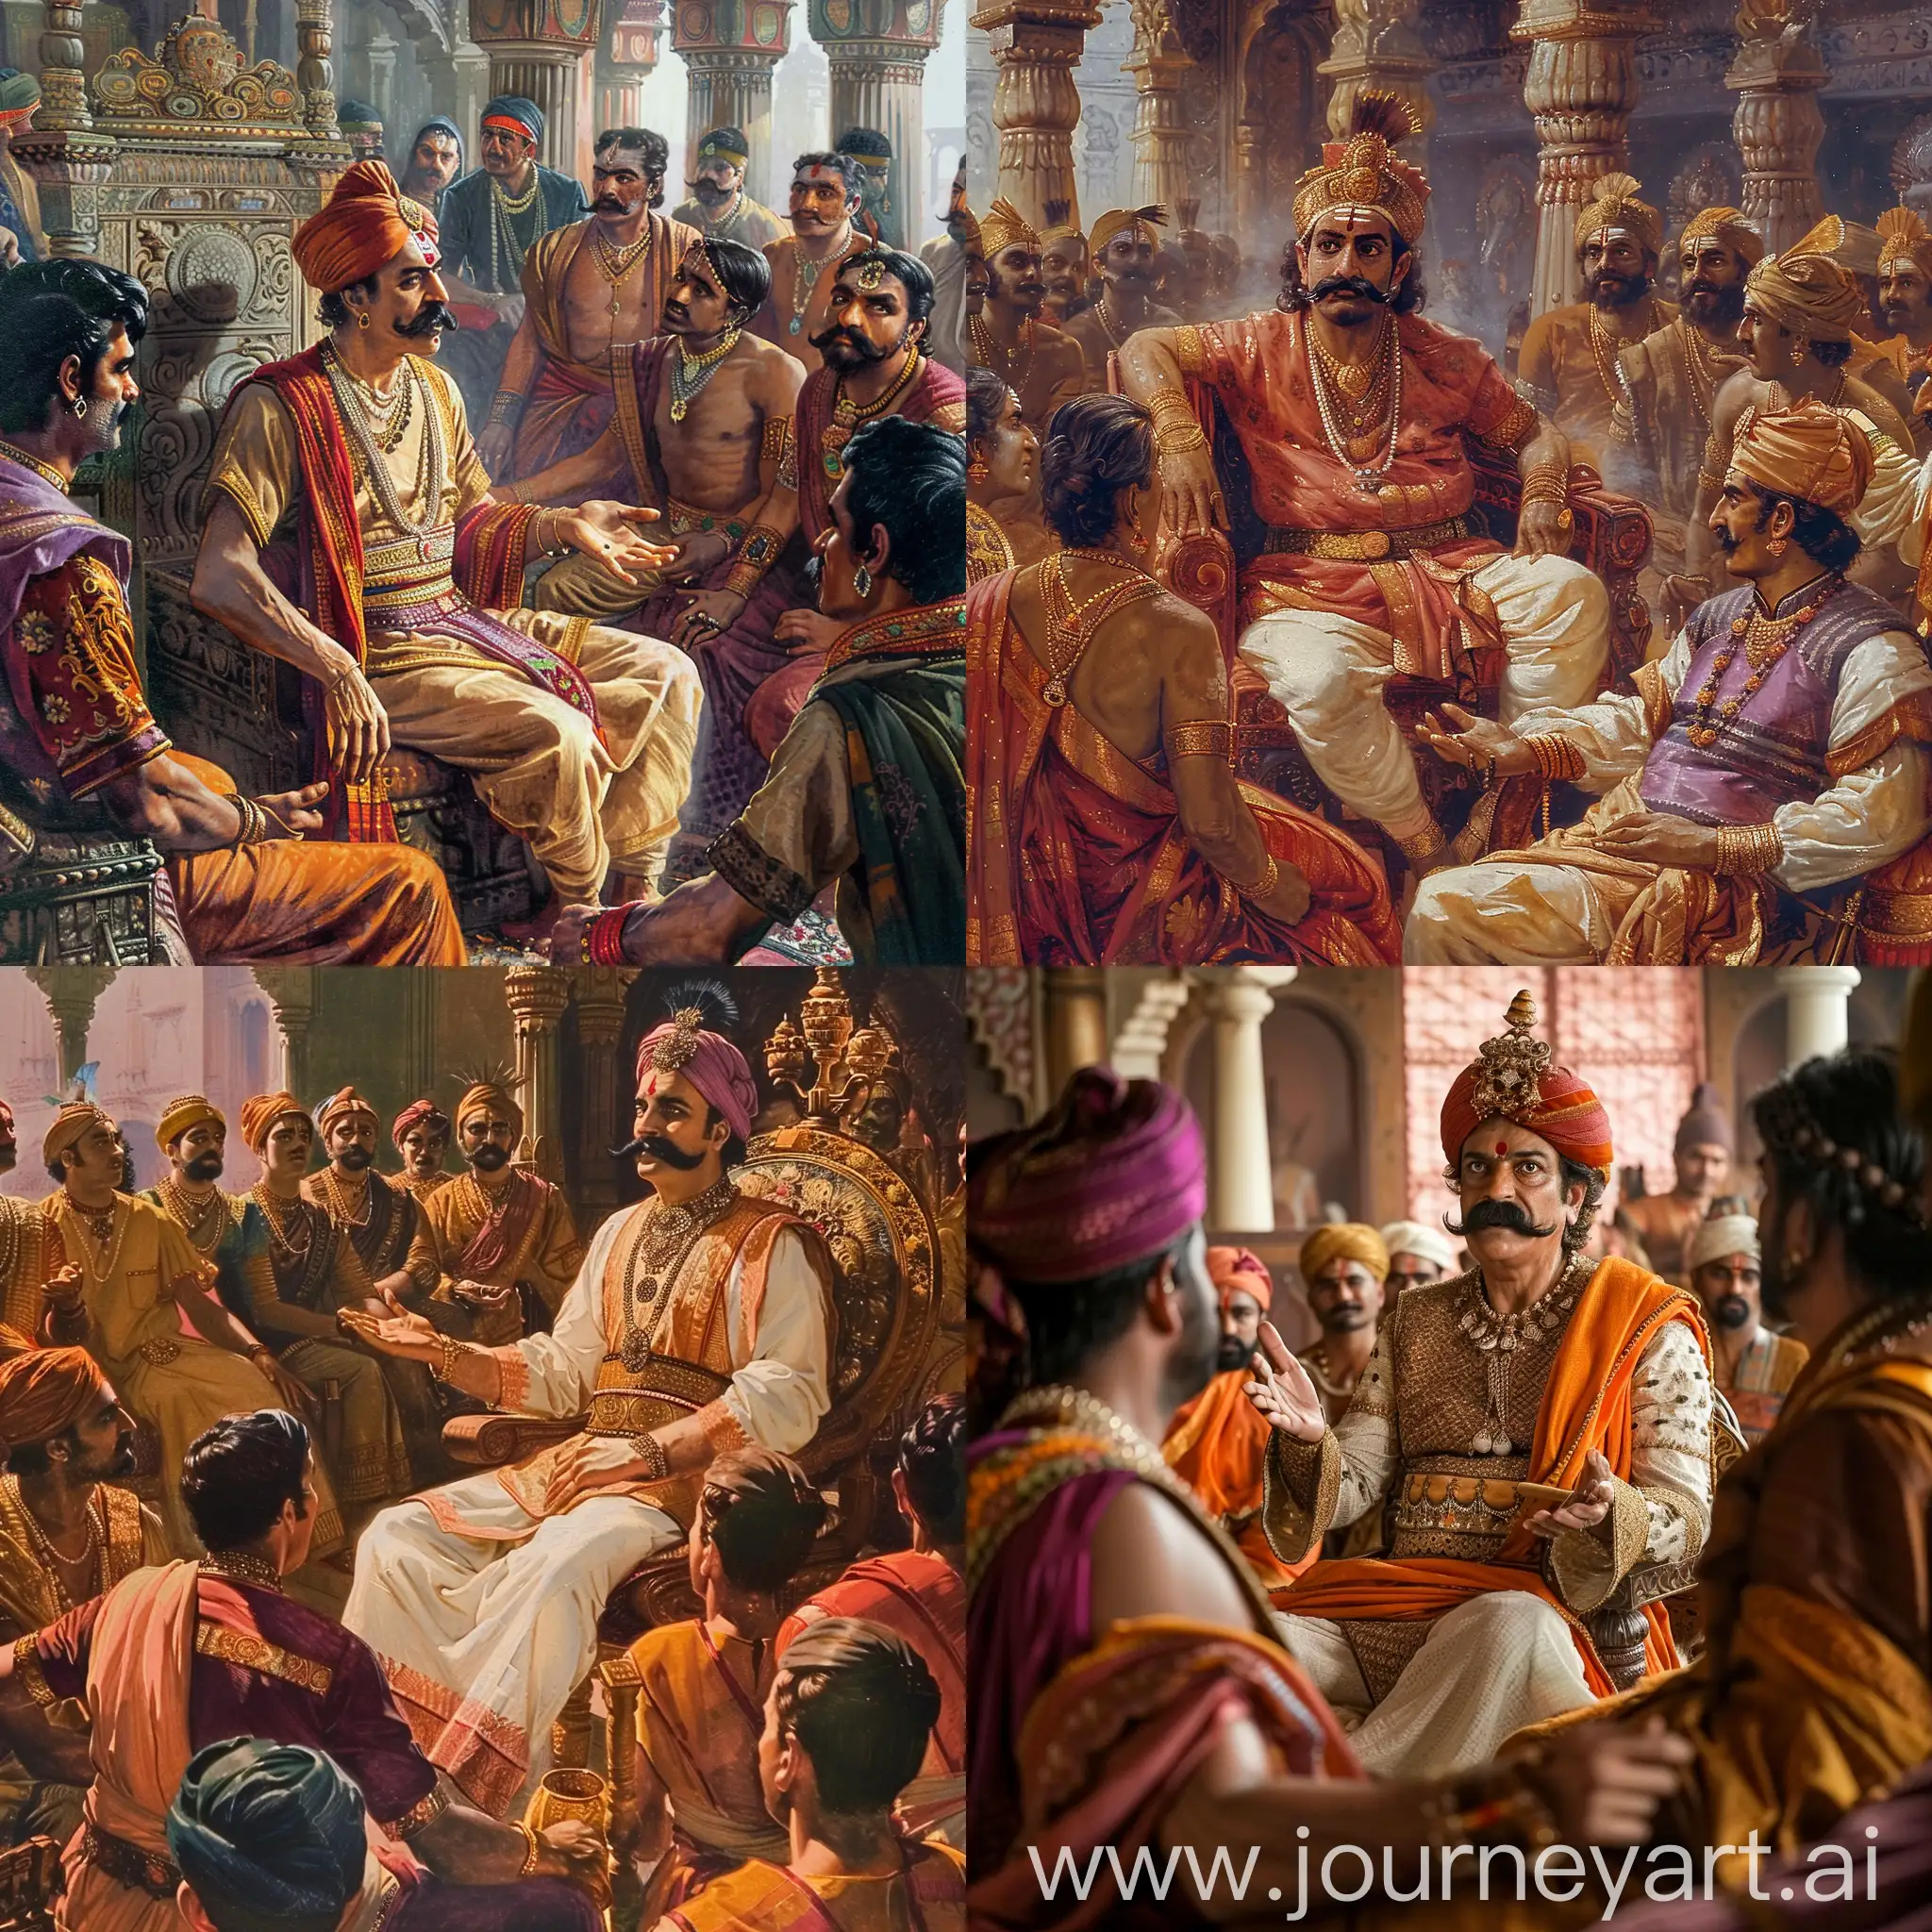 Rajput king with moustache and beard, middle aged, sitting on the throne in his court and asking something to one of the courtiers who also is replying. there are a dozen courtiers in the room